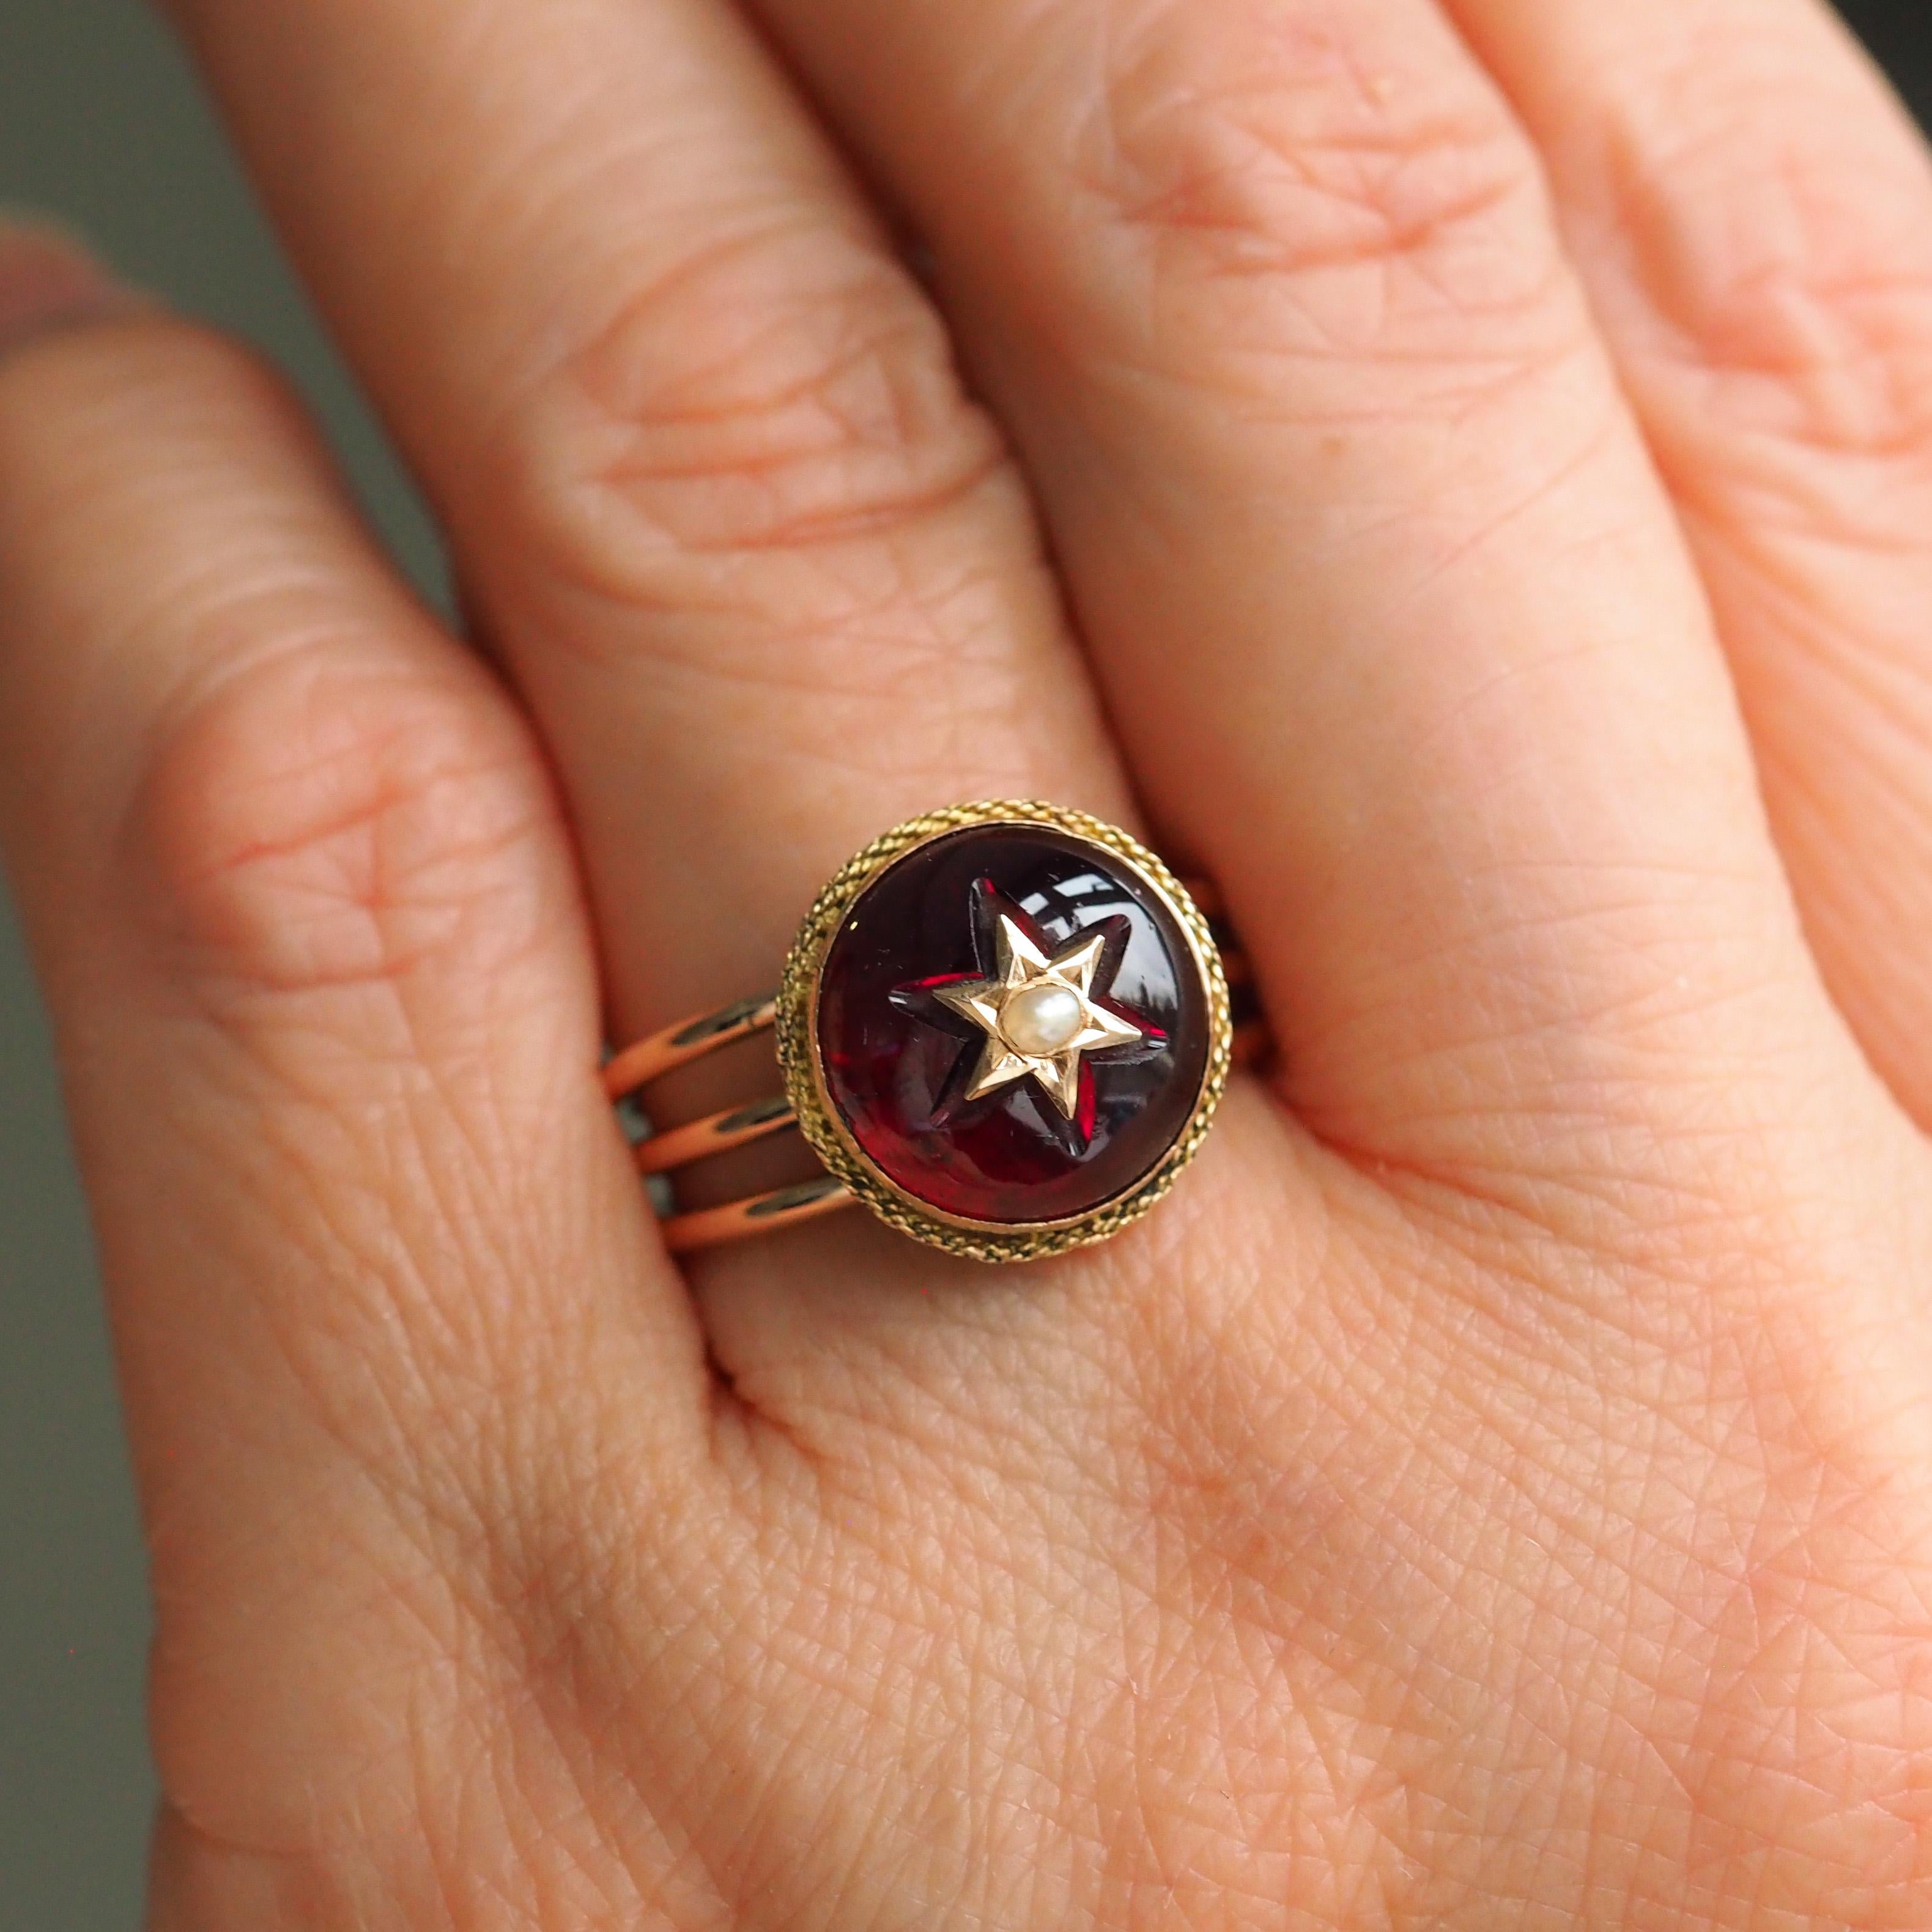 Antique Victorian 14K Gold Garnet Star Cabochon Ring with Seed Pearl - c.1880 For Sale 5